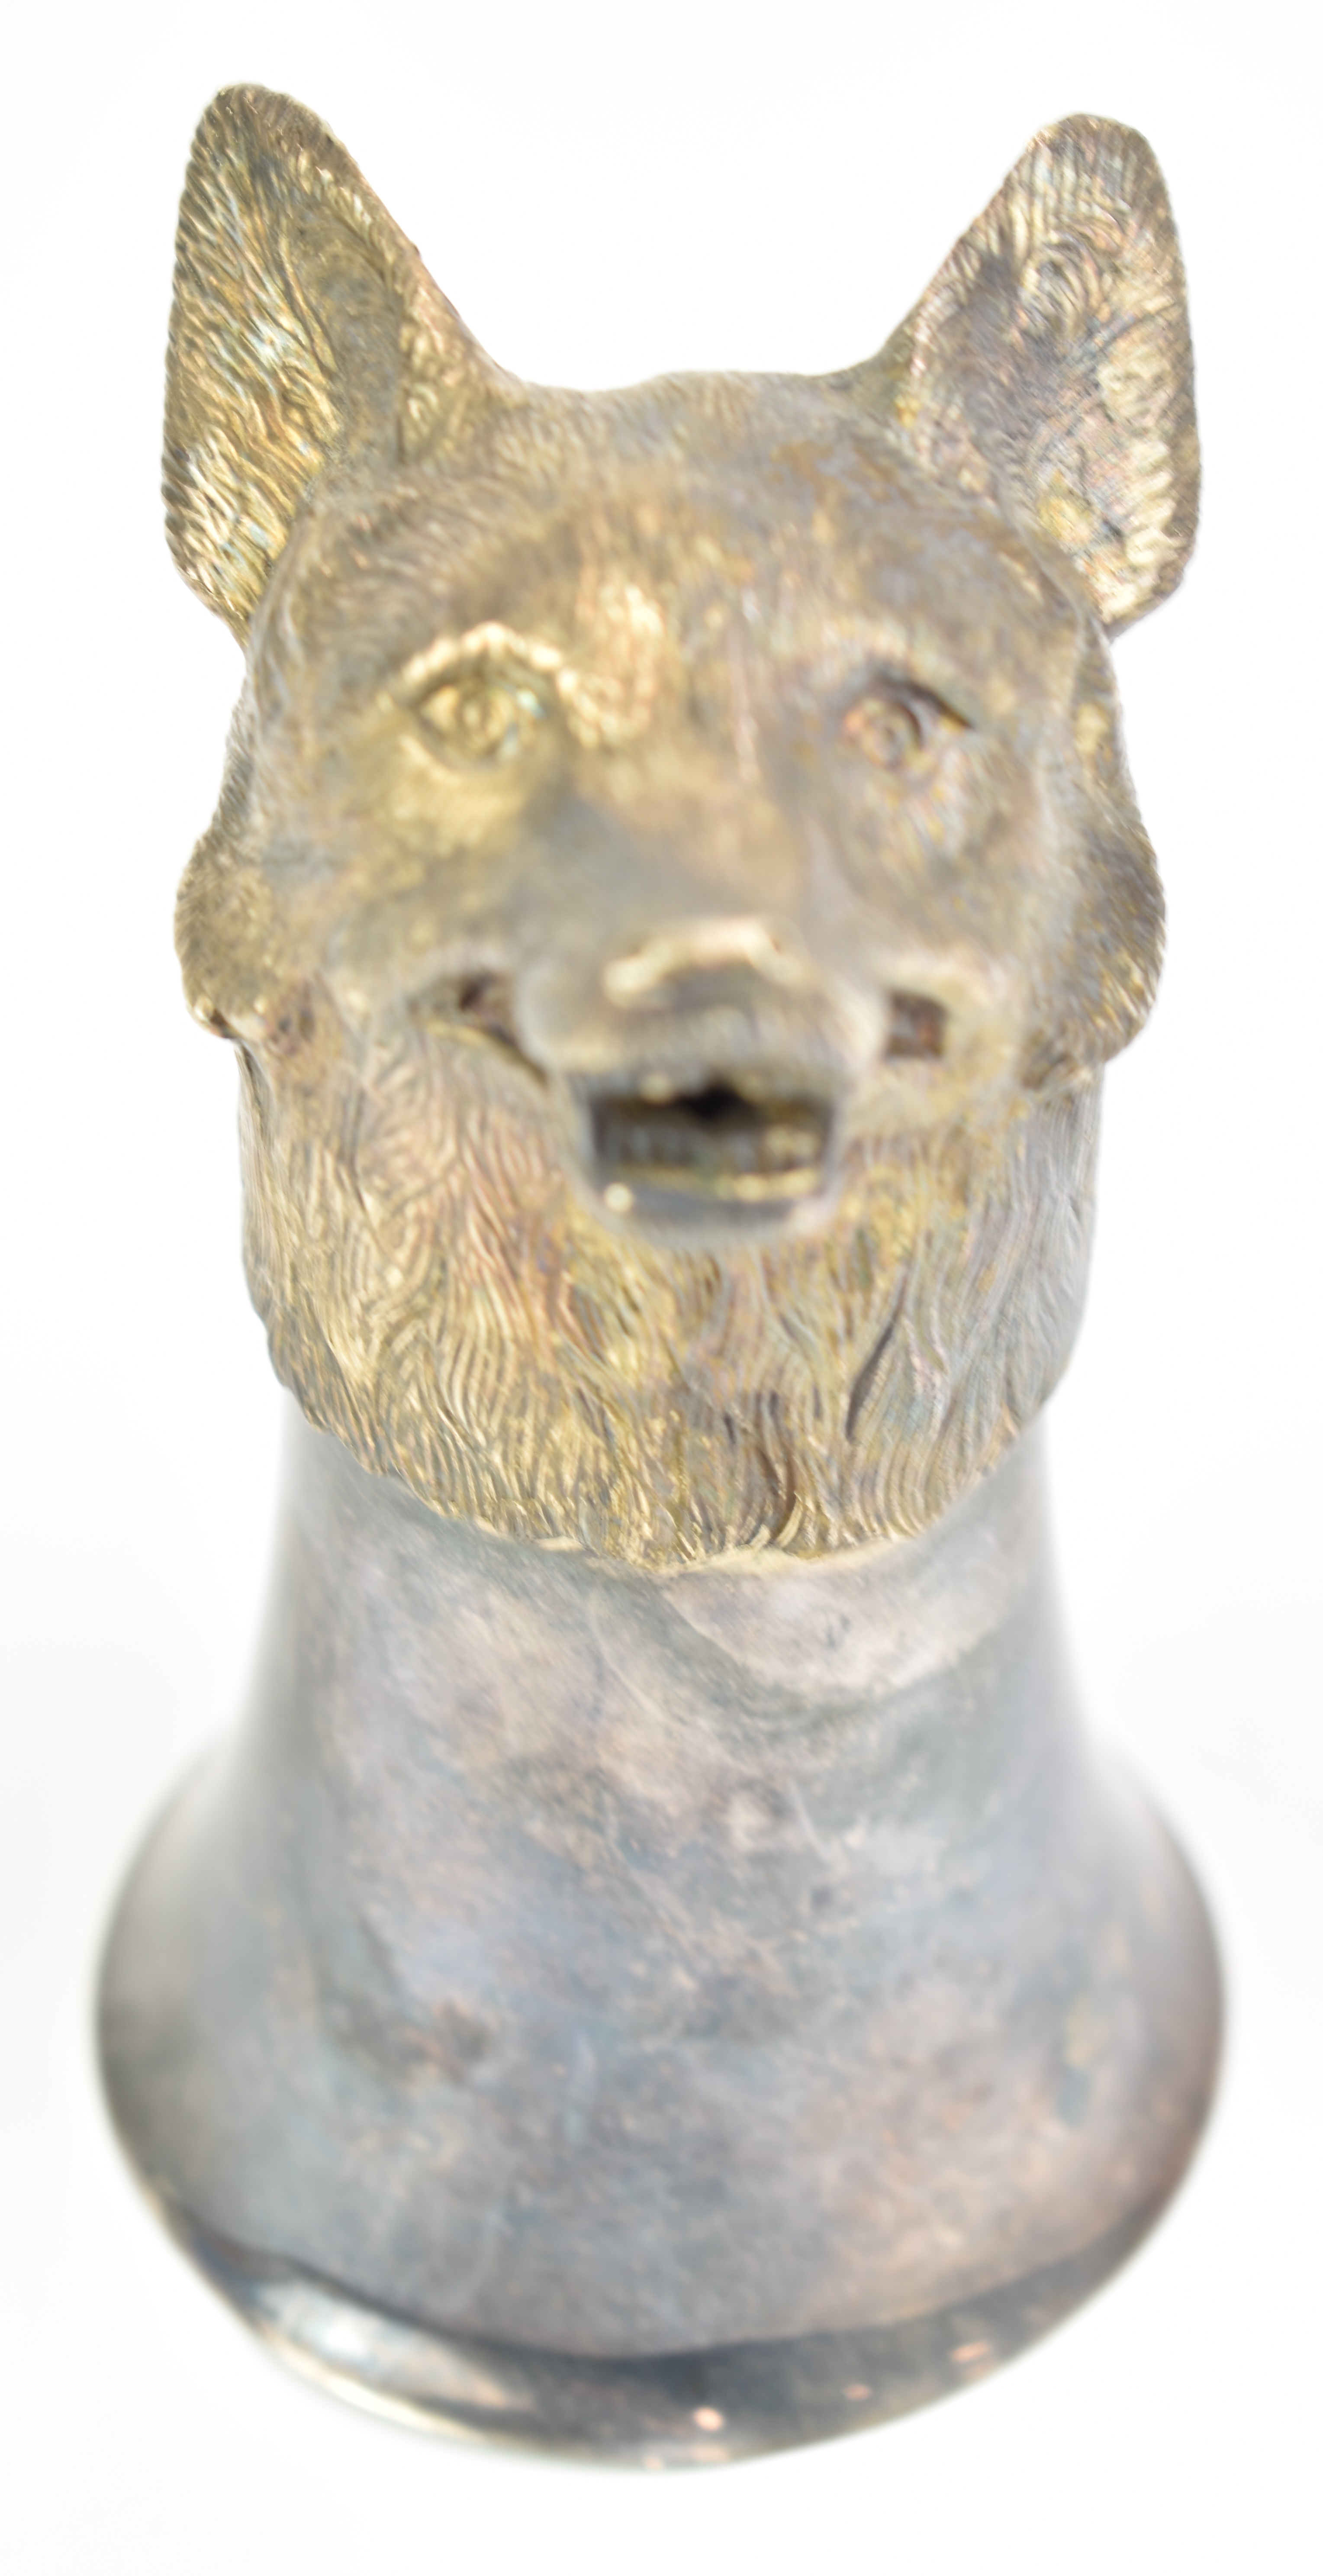 Irish hallmarked silver novelty stirrup cup formed as a fox's head, Dublin 1998, maker Alwright & - Image 3 of 5